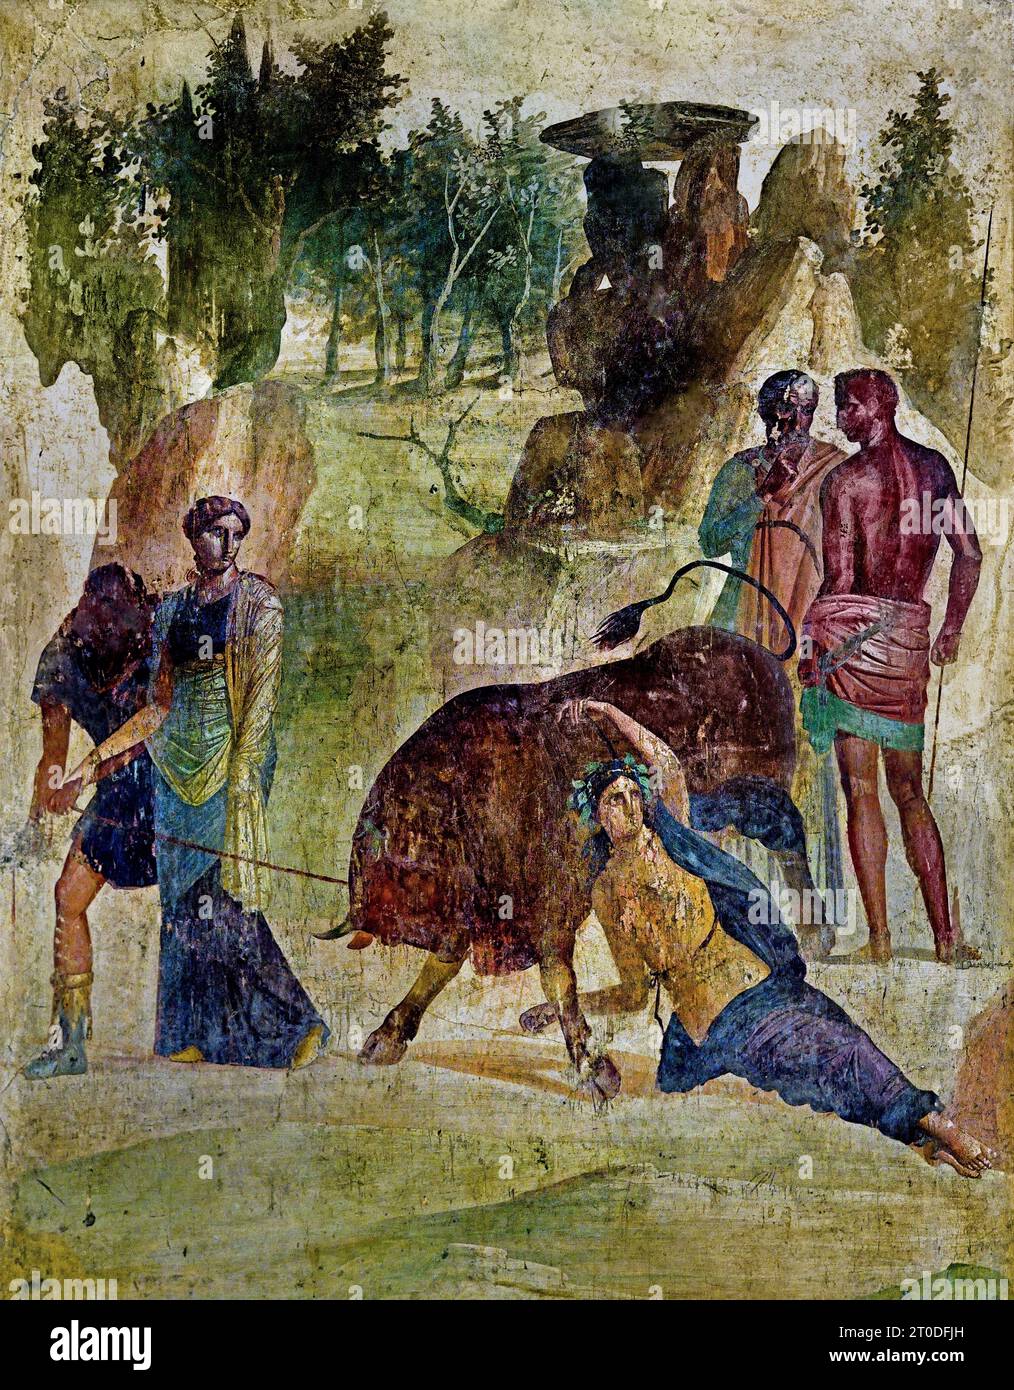 Dirce is tied to a bull by Amphion and Zeto to avenge his mother Antiope. Fresco Pompeii Roman City is located near Naples in the Campania region of Italy. Pompeii was buried under 4-6 m of volcanic ash and pumice in the eruption of Mount Vesuvius in AD 79. Italy Stock Photo